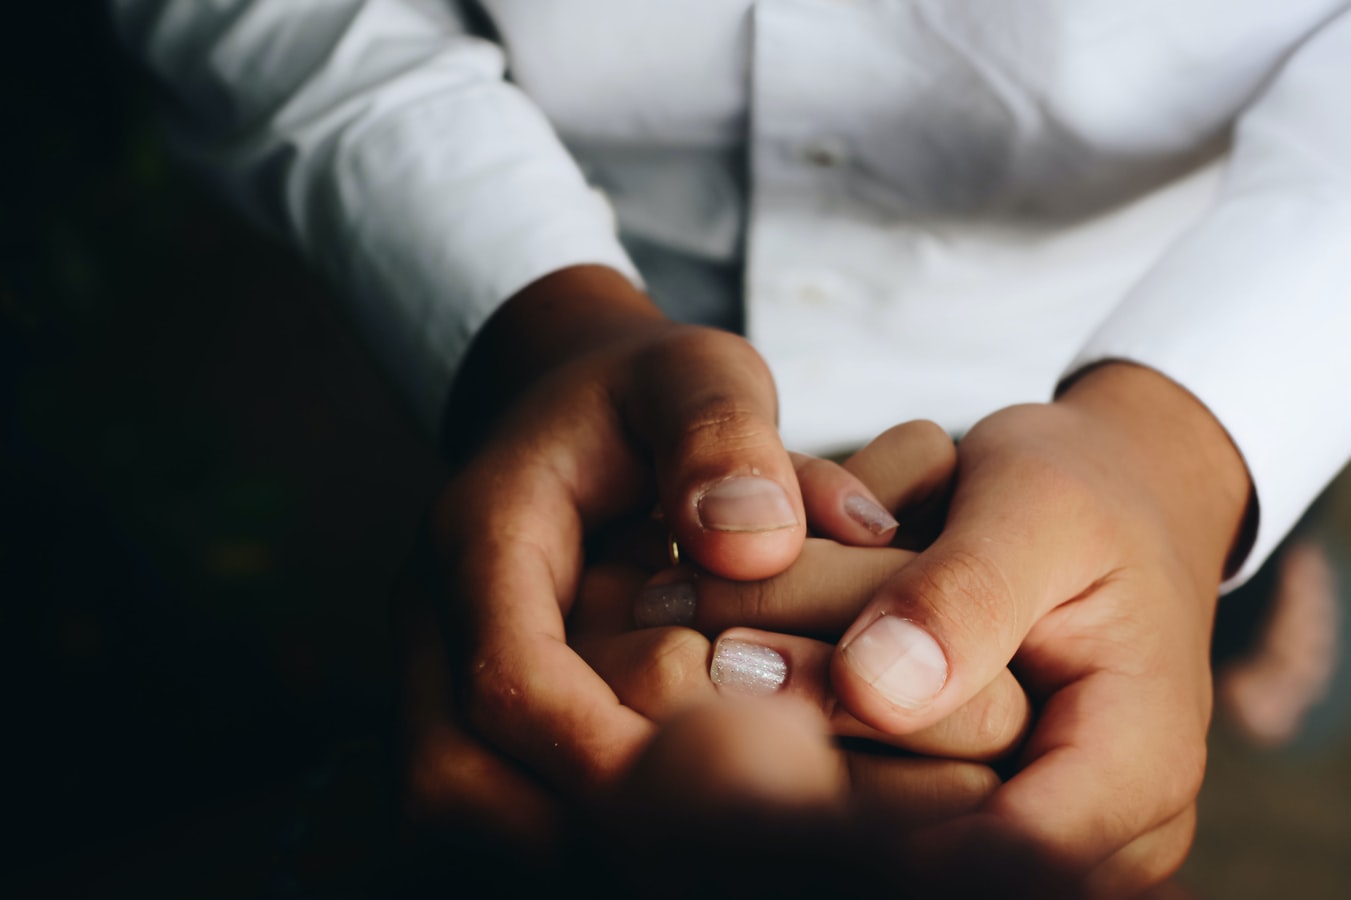 A doctor holding the hands of an individual undergoing addiction treatment